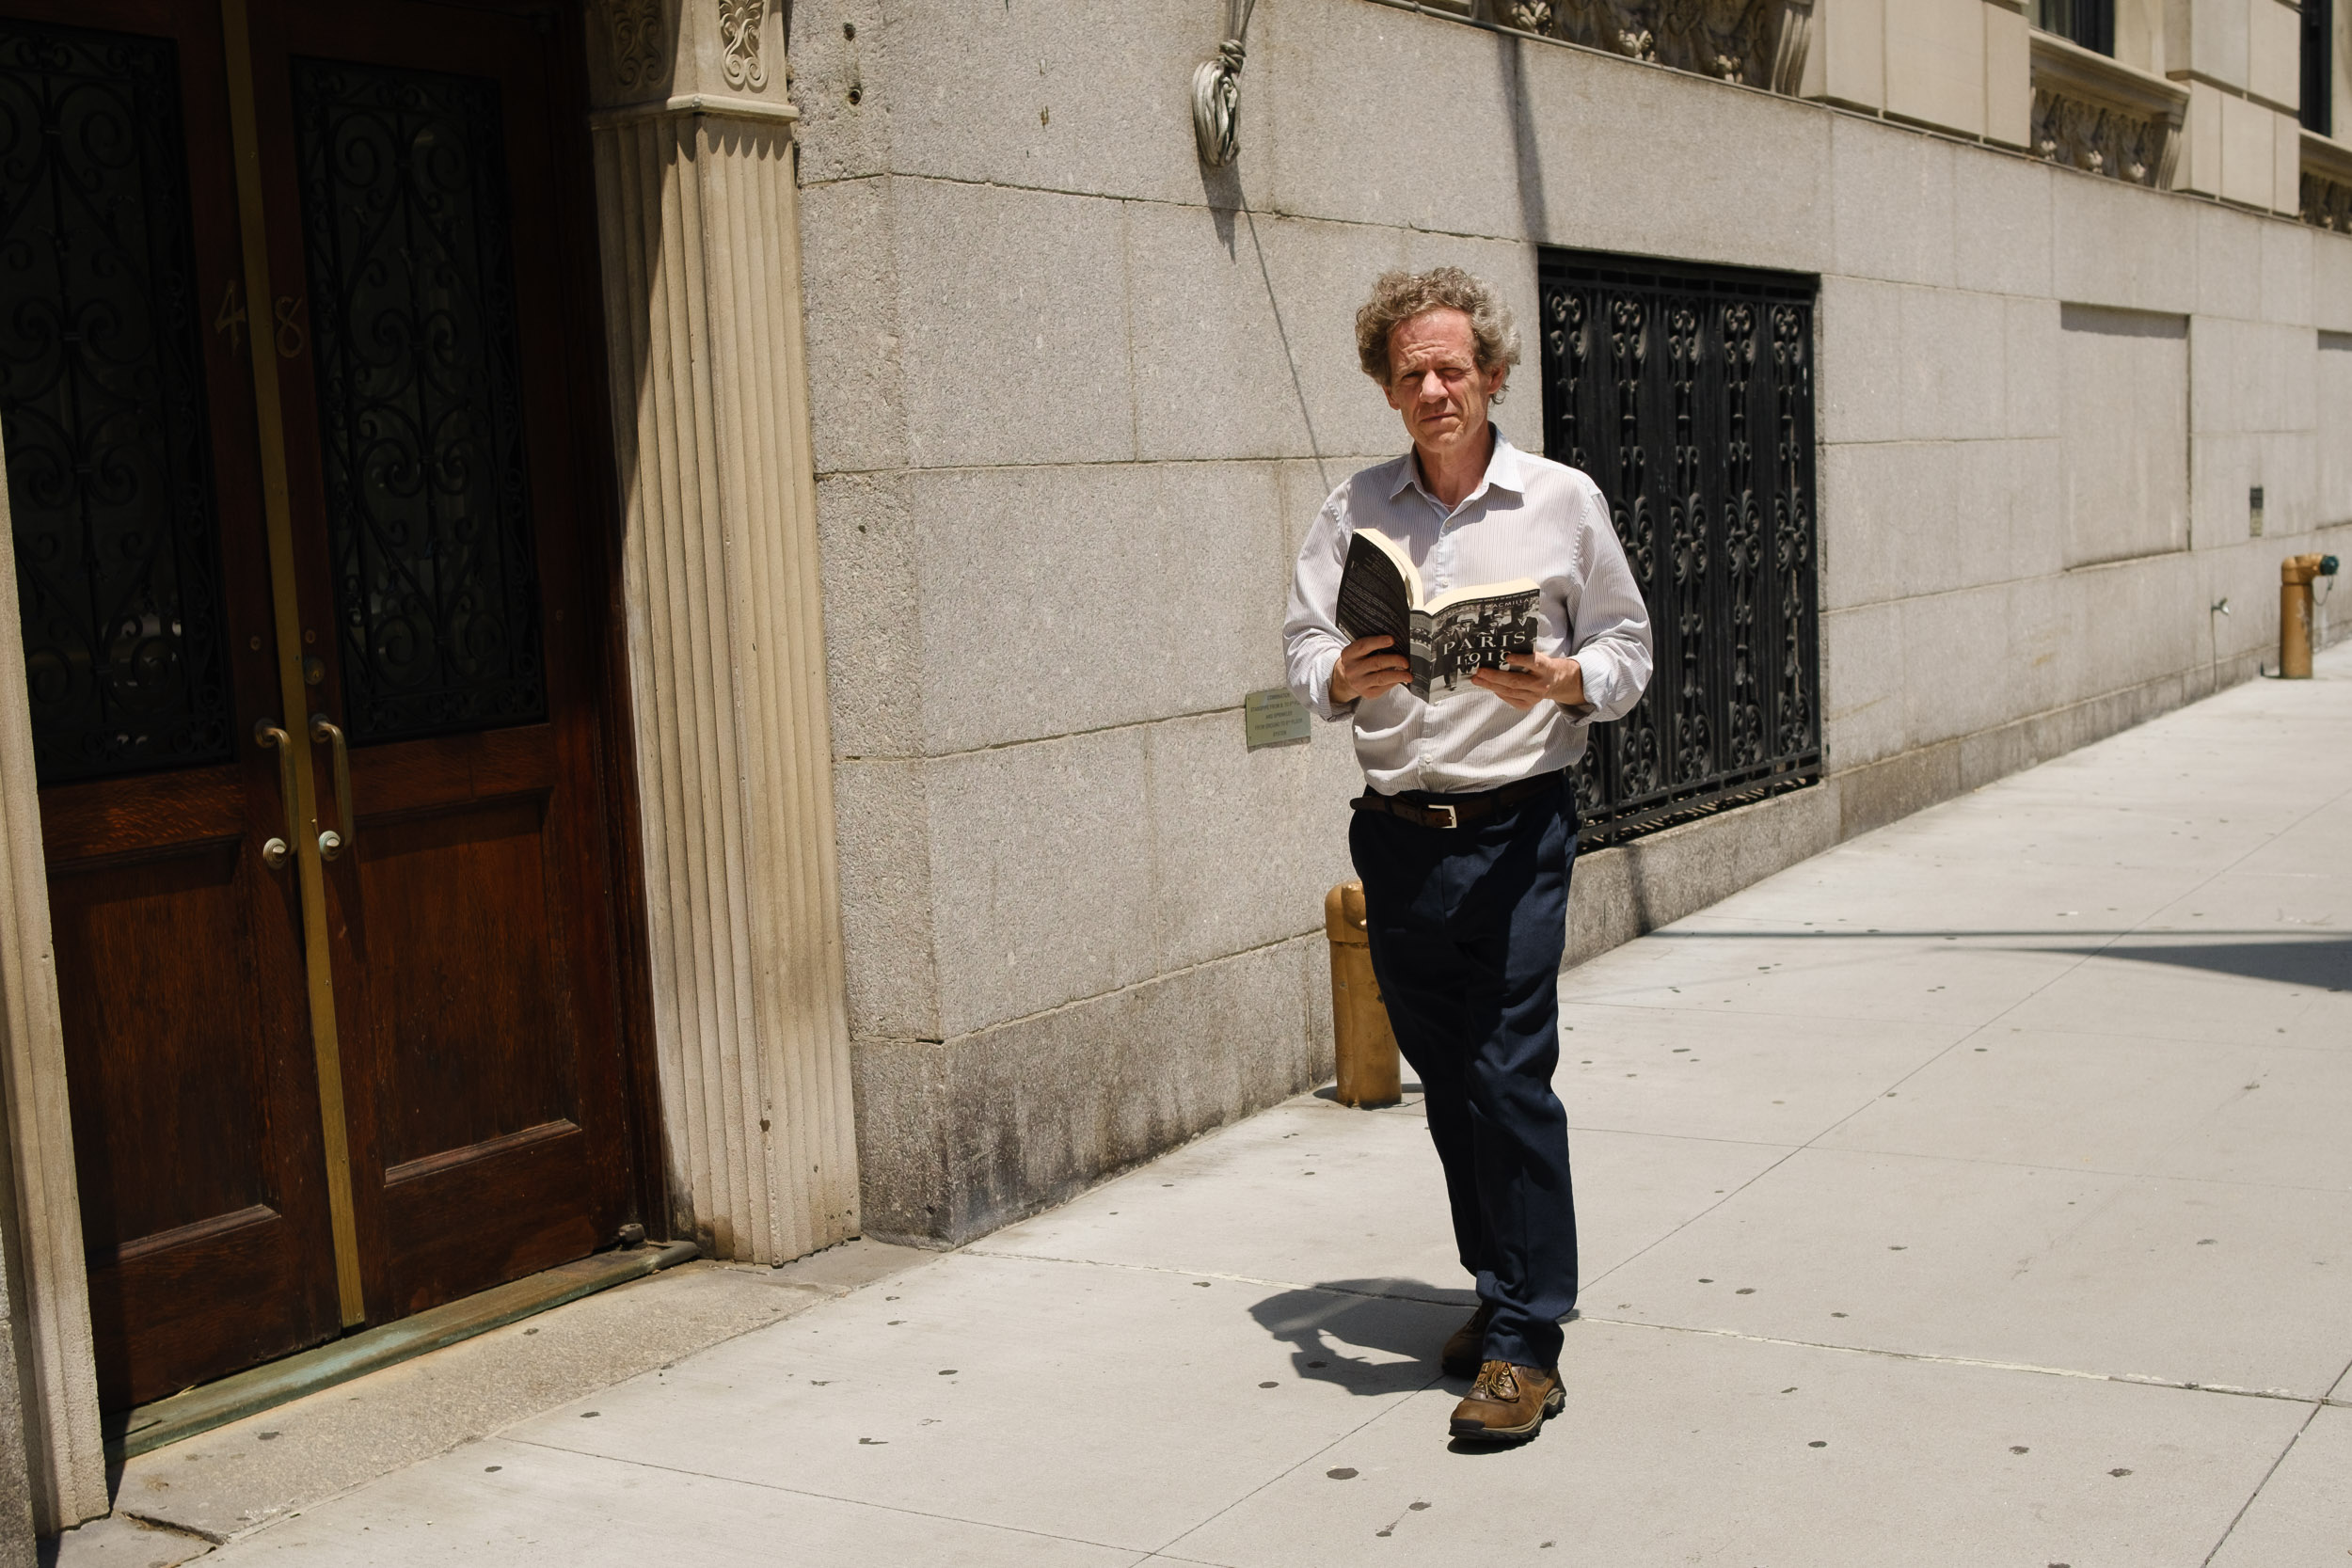 Person walking while reading a book Park Avenue New York 